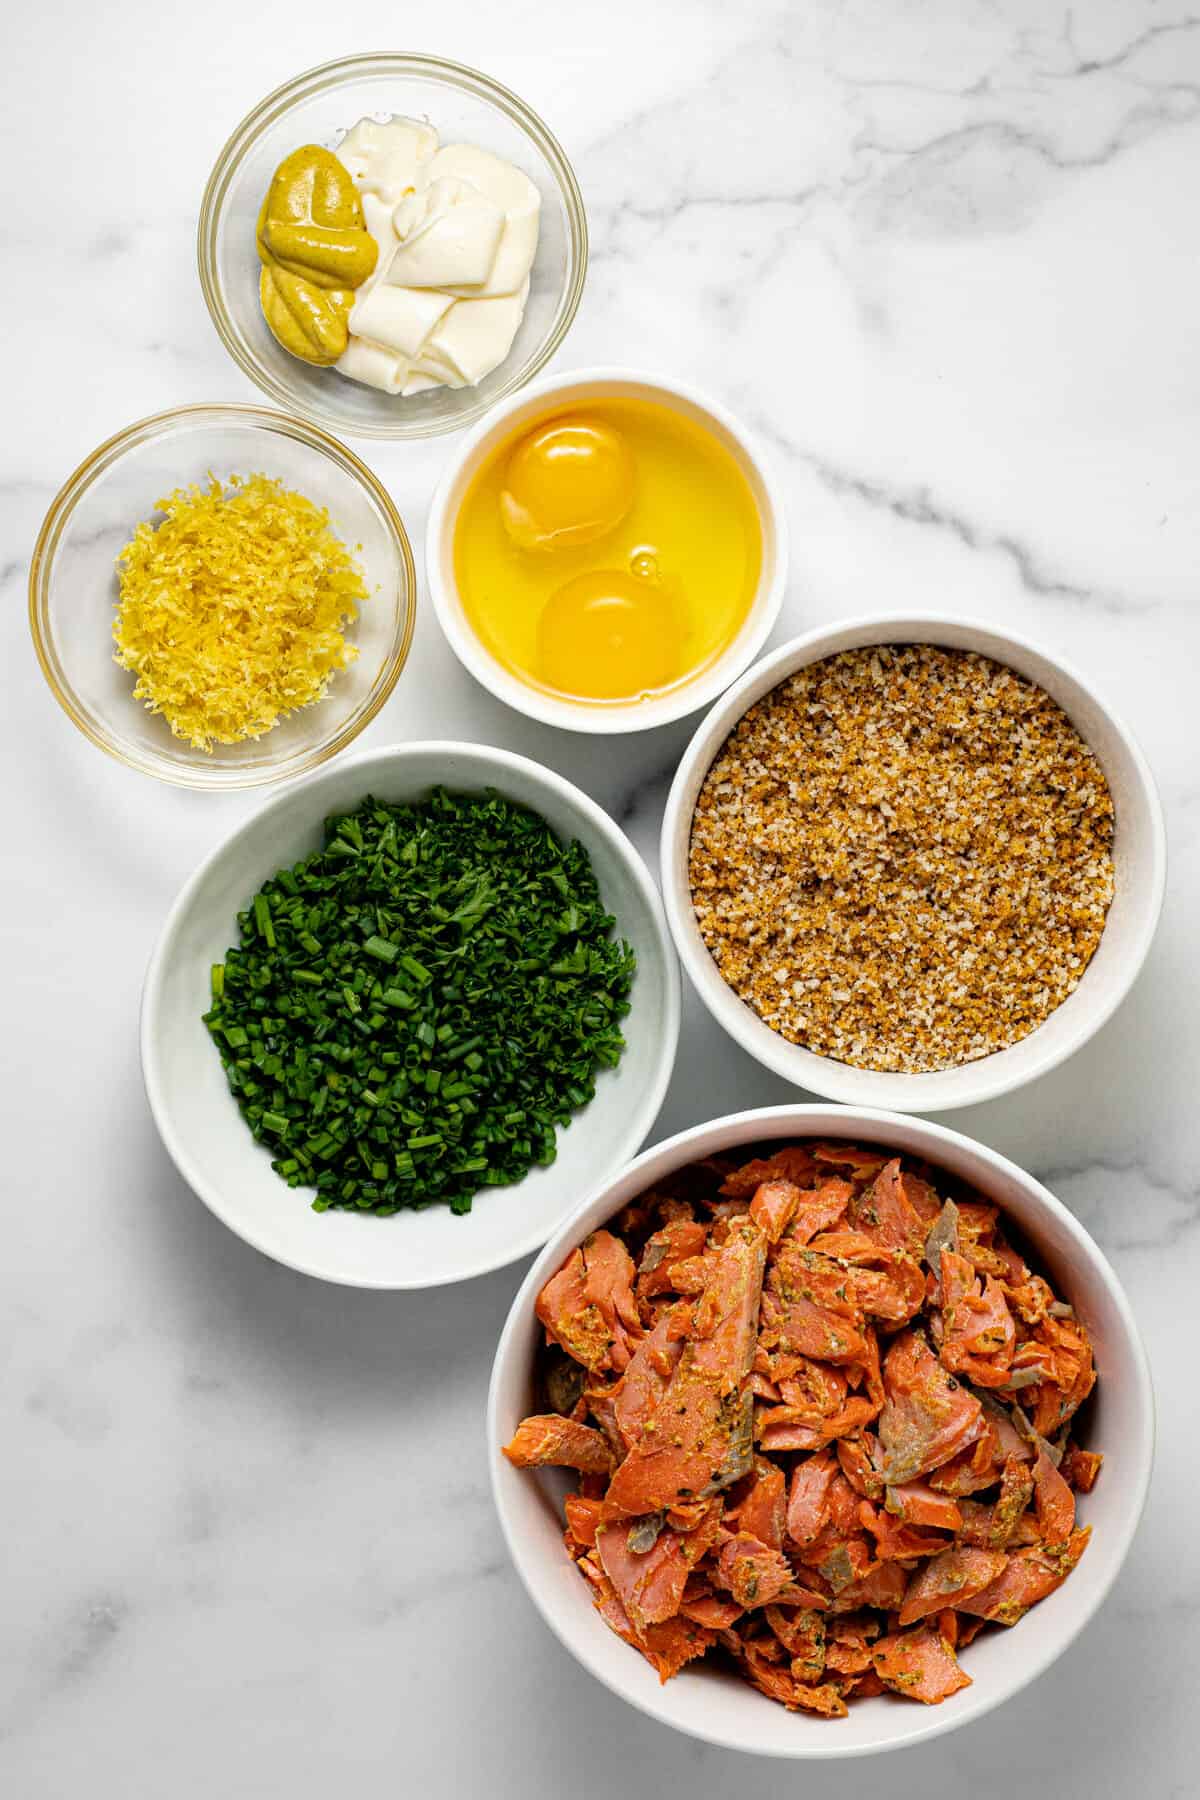 White marble counter top with bowls of ingredients to make salmon burgers